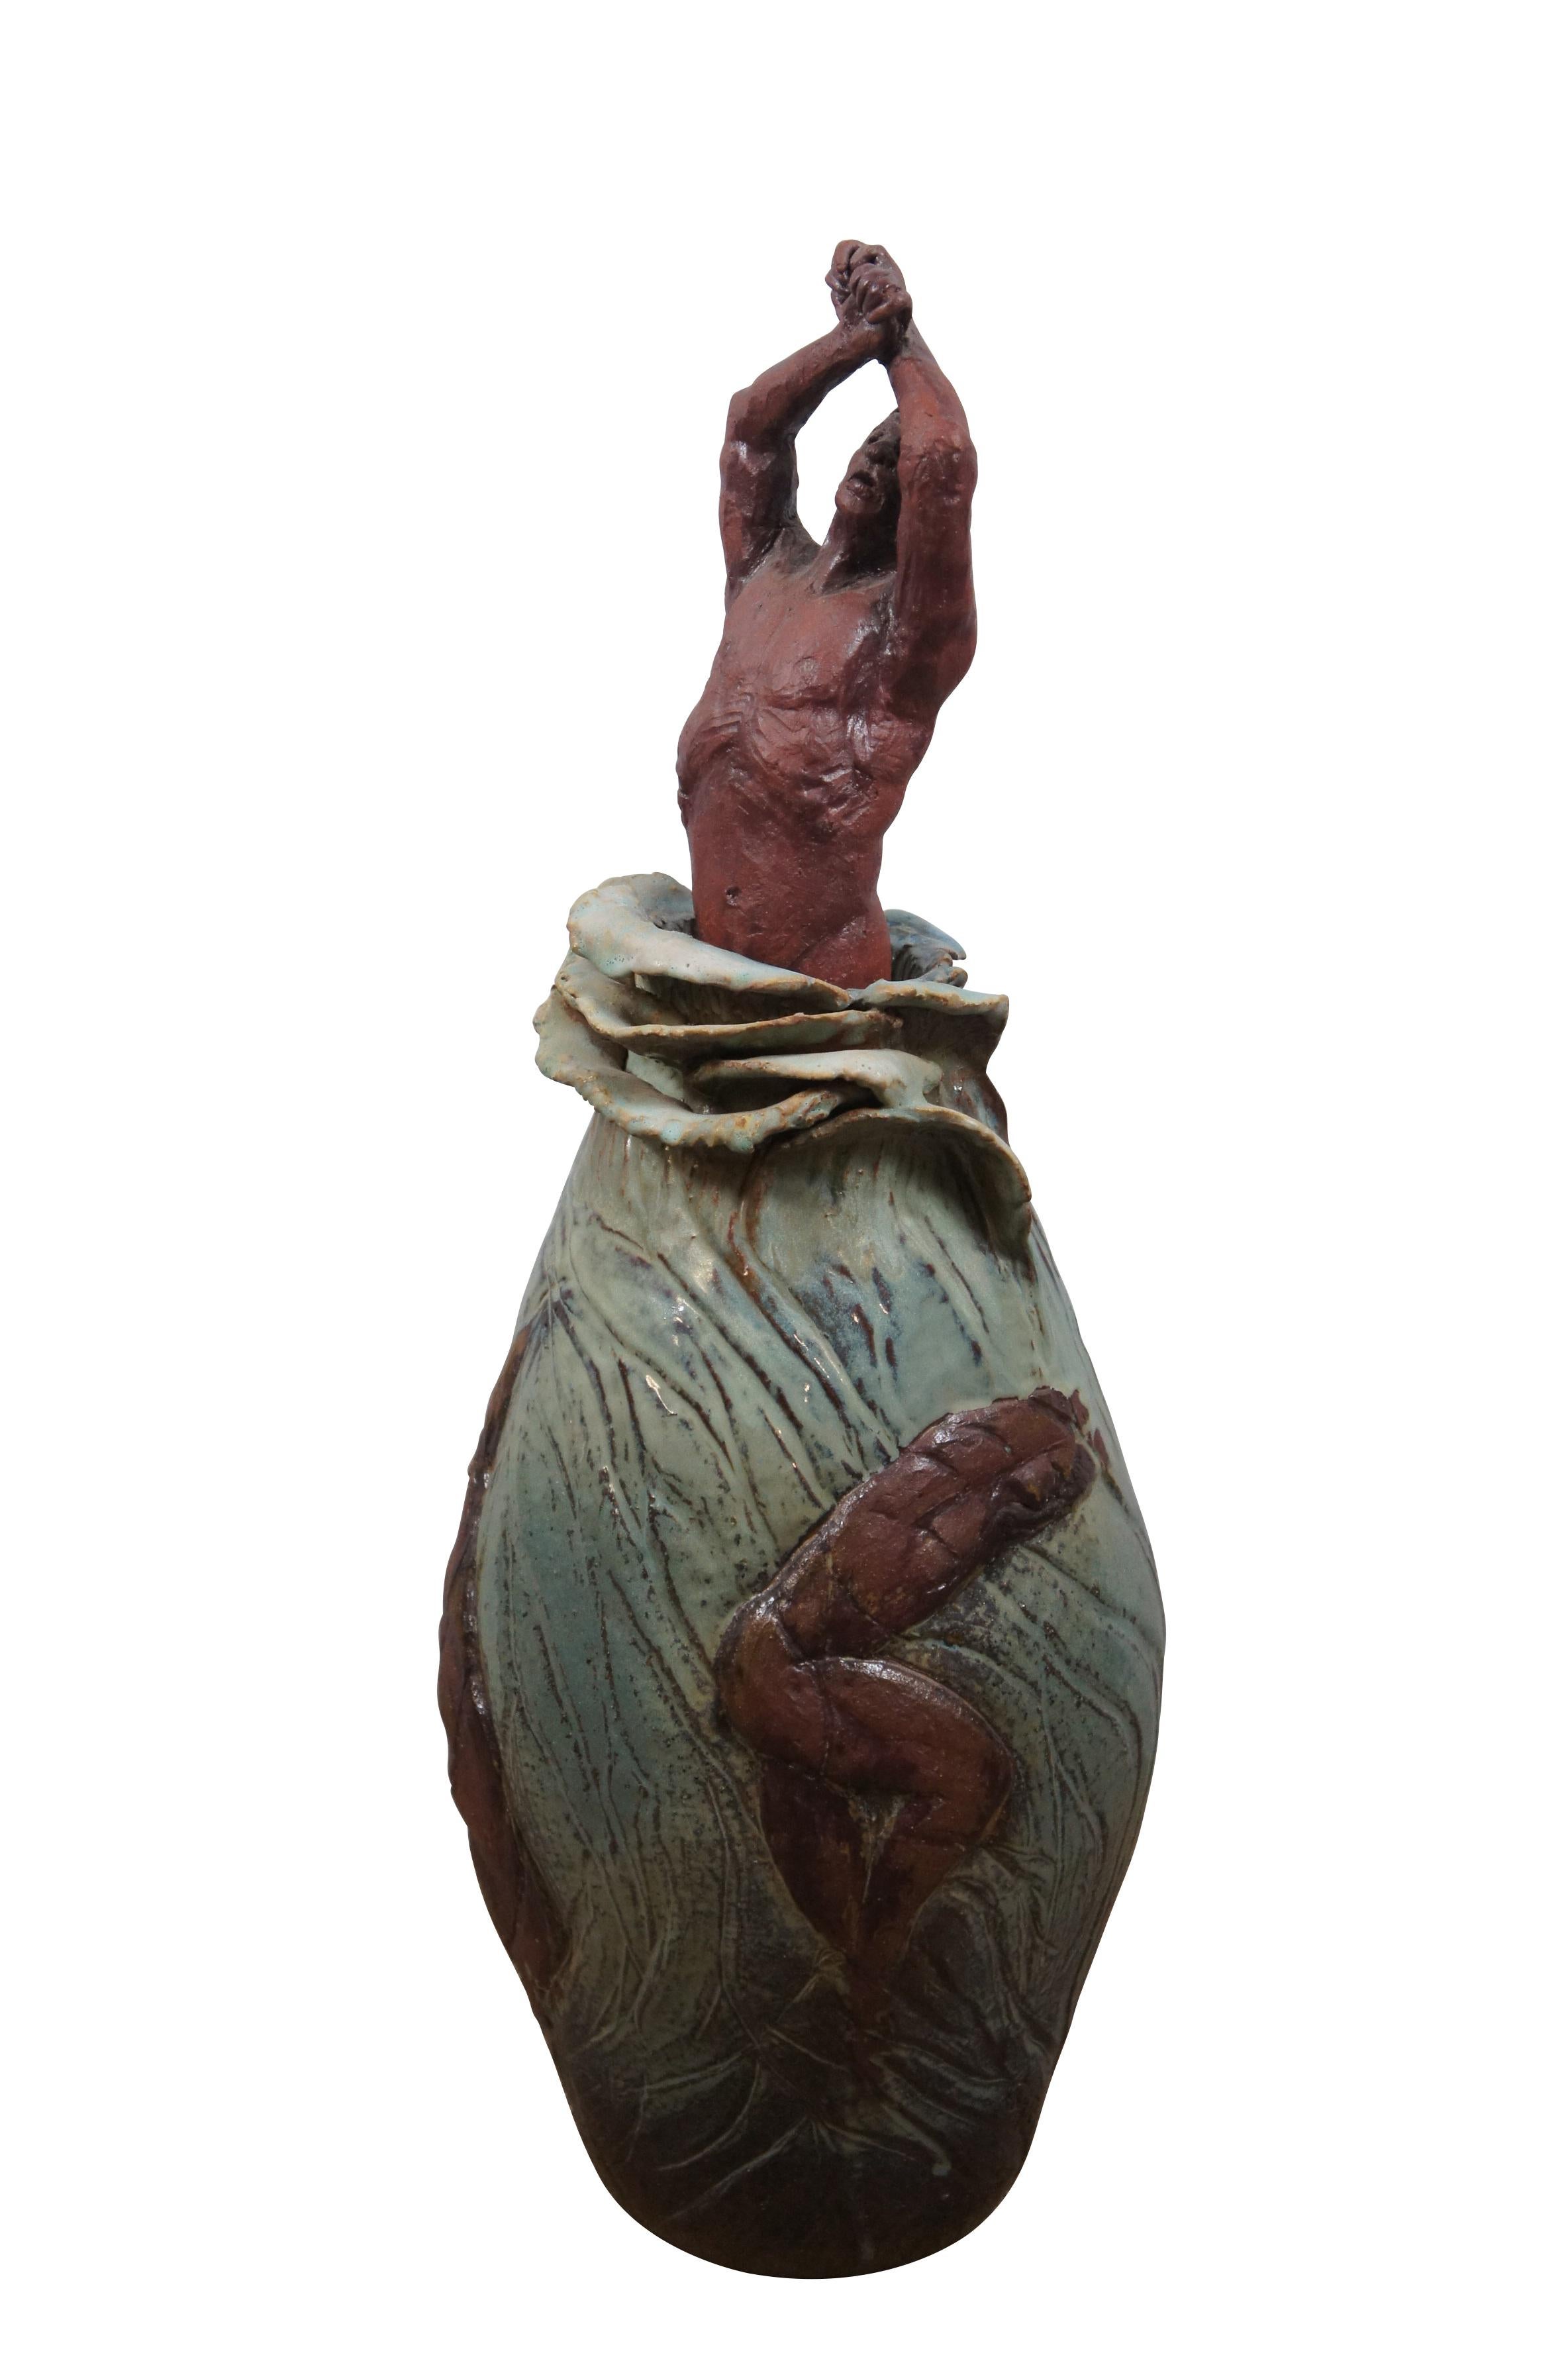 Vintage ceramic art sculpture by Bob Coates. Features a male figure emerging from the waist up from a swirling green base that resembles ocean waves or a veined flower bud, decorated with other brown figures in various dancing / falling attitudes.